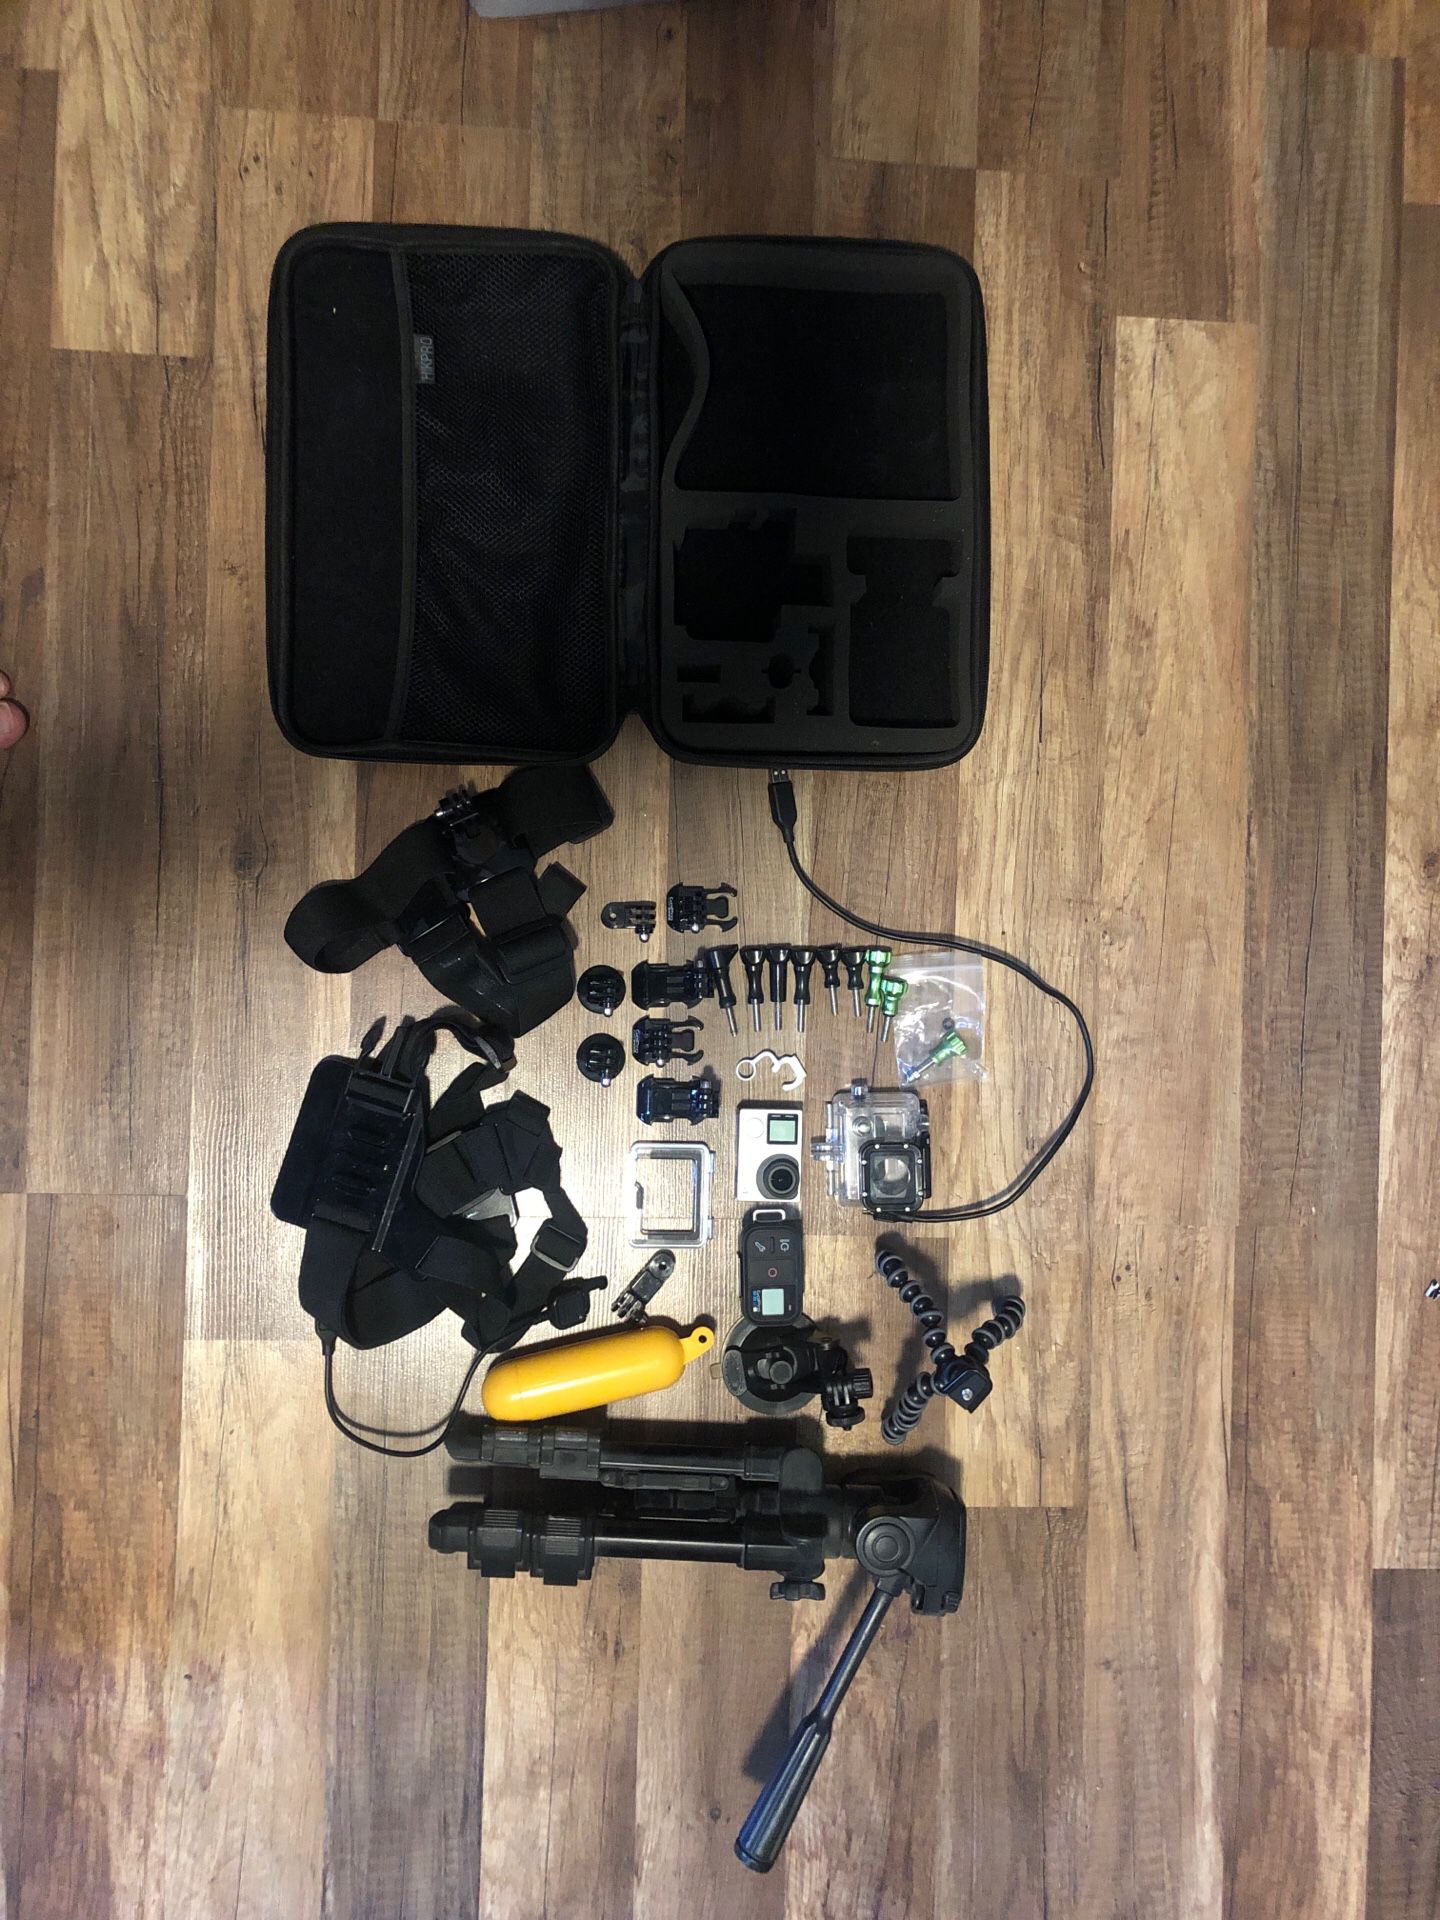 GoPro hero 4 silver with accessories and carrying case